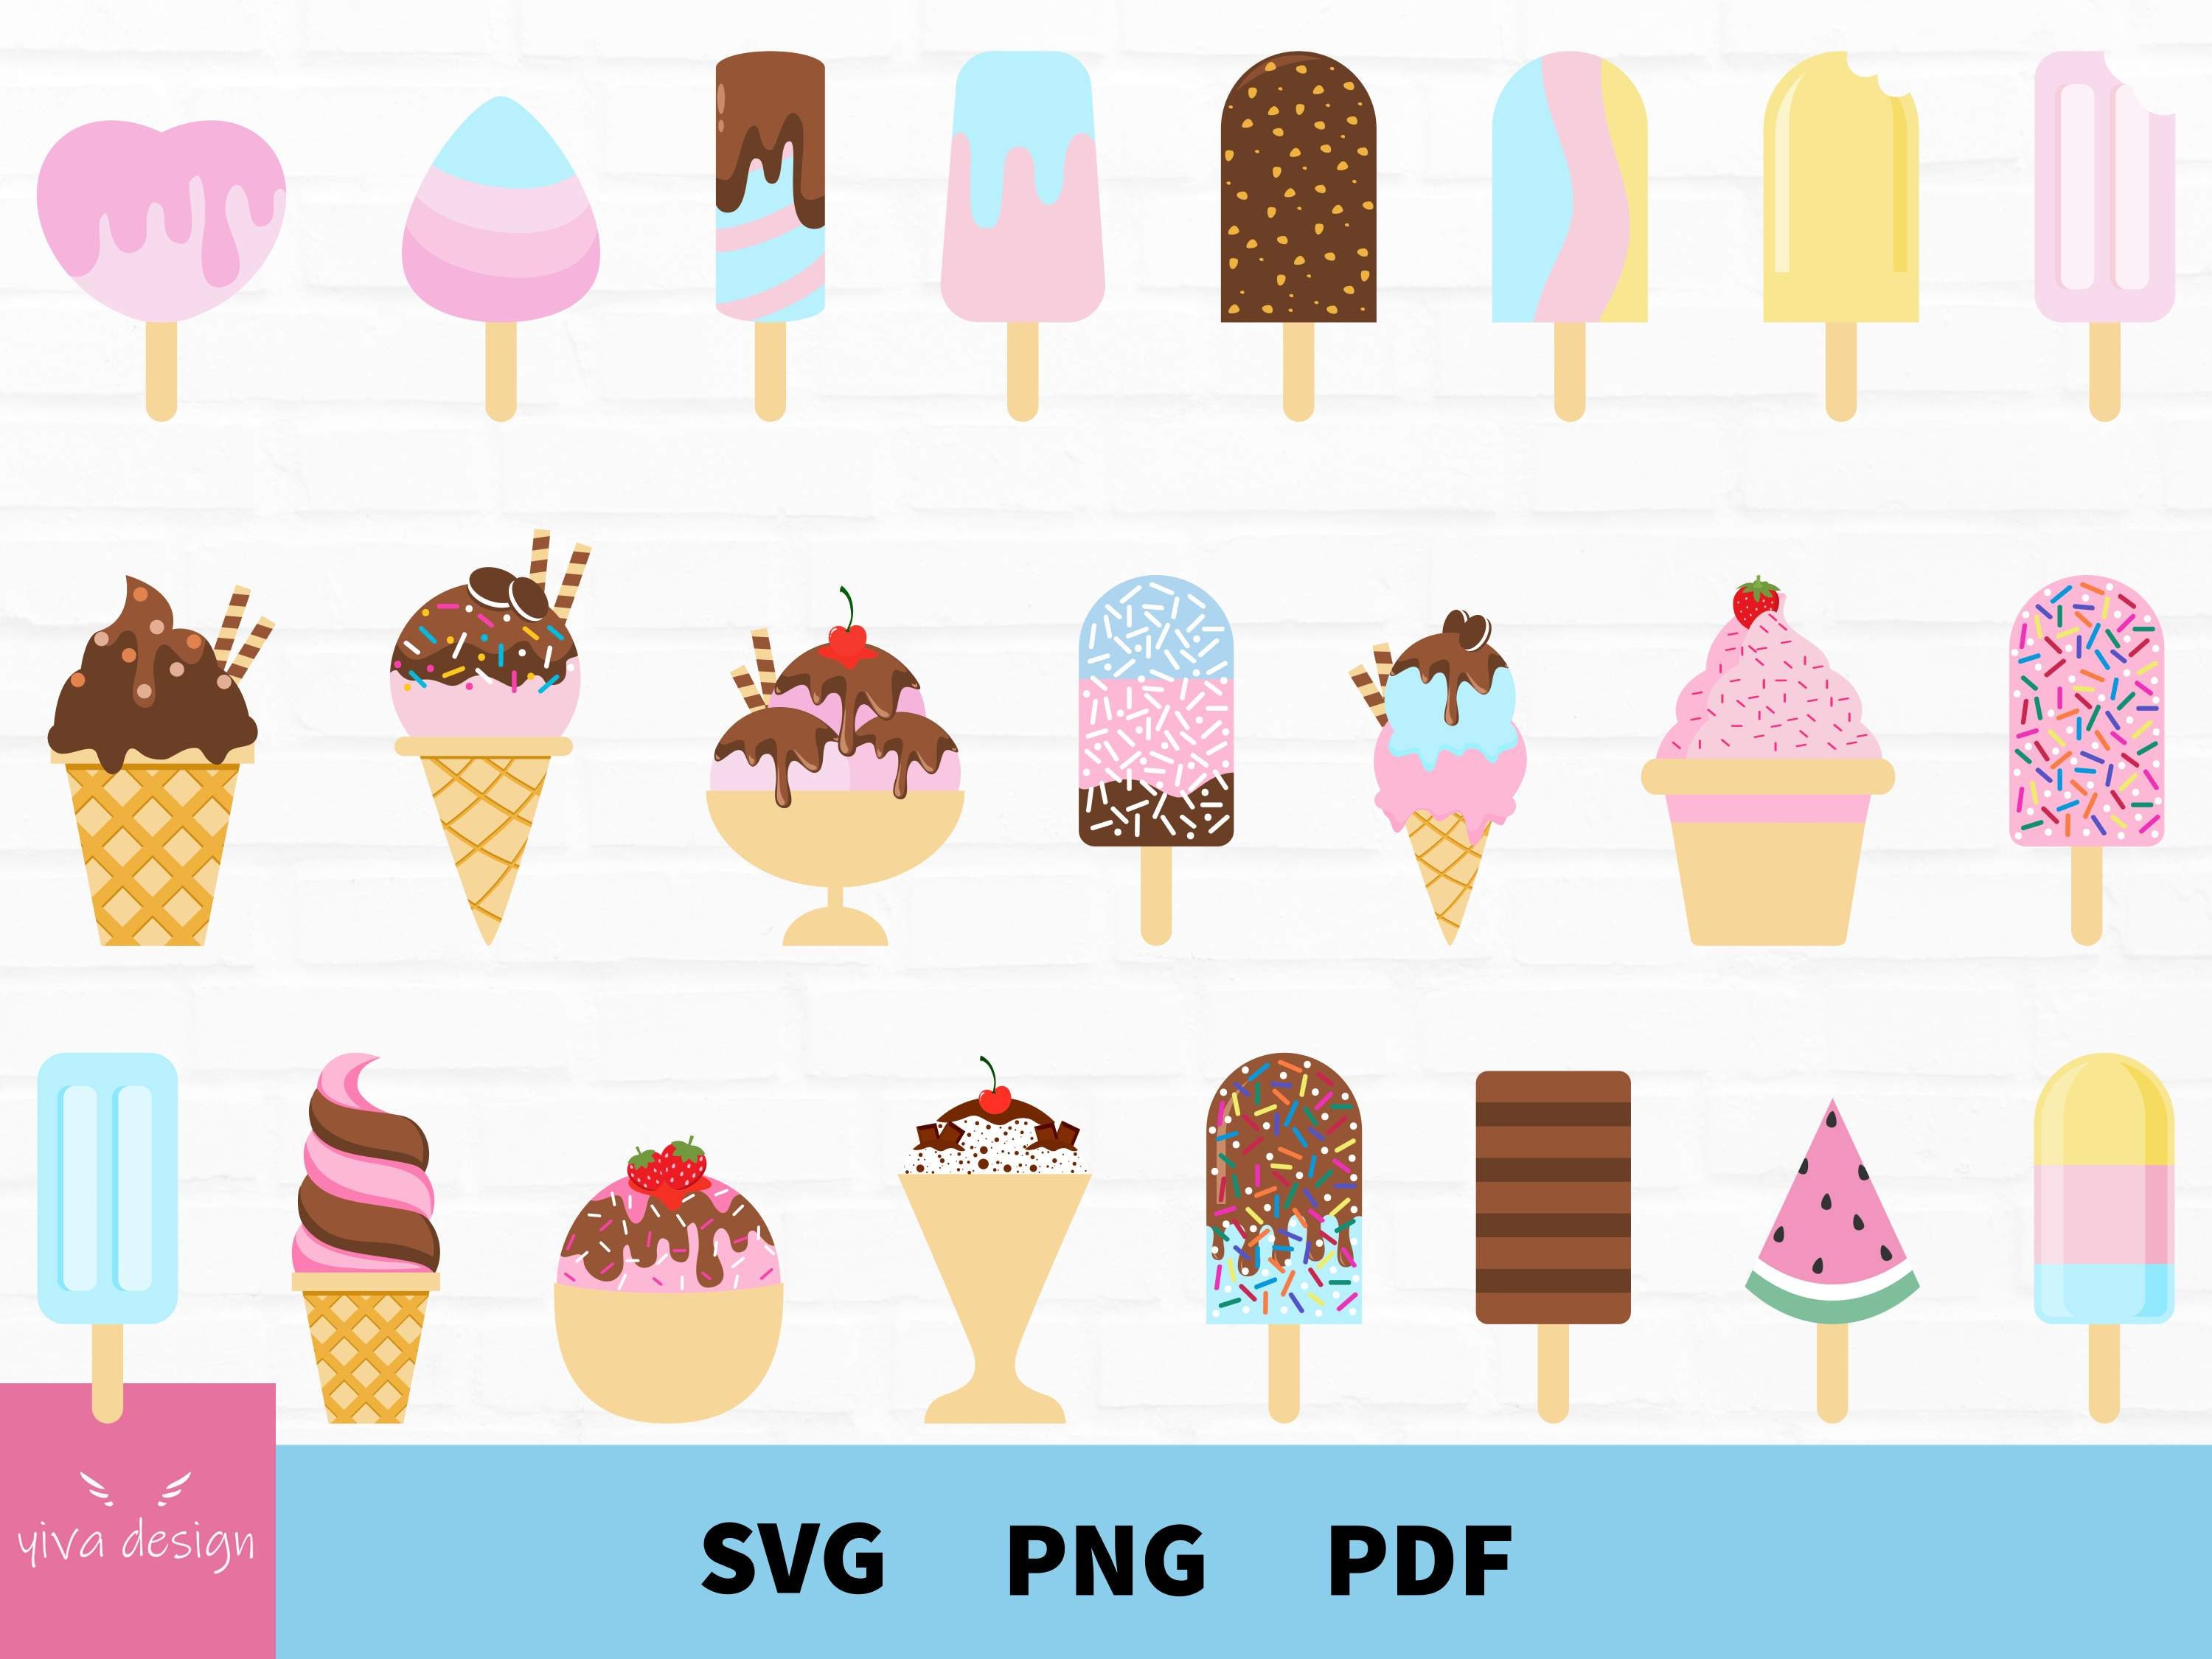 3 Scoop Ice Cream Cone Sprinkles Outline Svg, Ice Cream Svg, Ice Cream Cone  Svg, Ice Cream Vector, Waffle Cone Svg, Cute Ice Cream Svg (Download Now) 